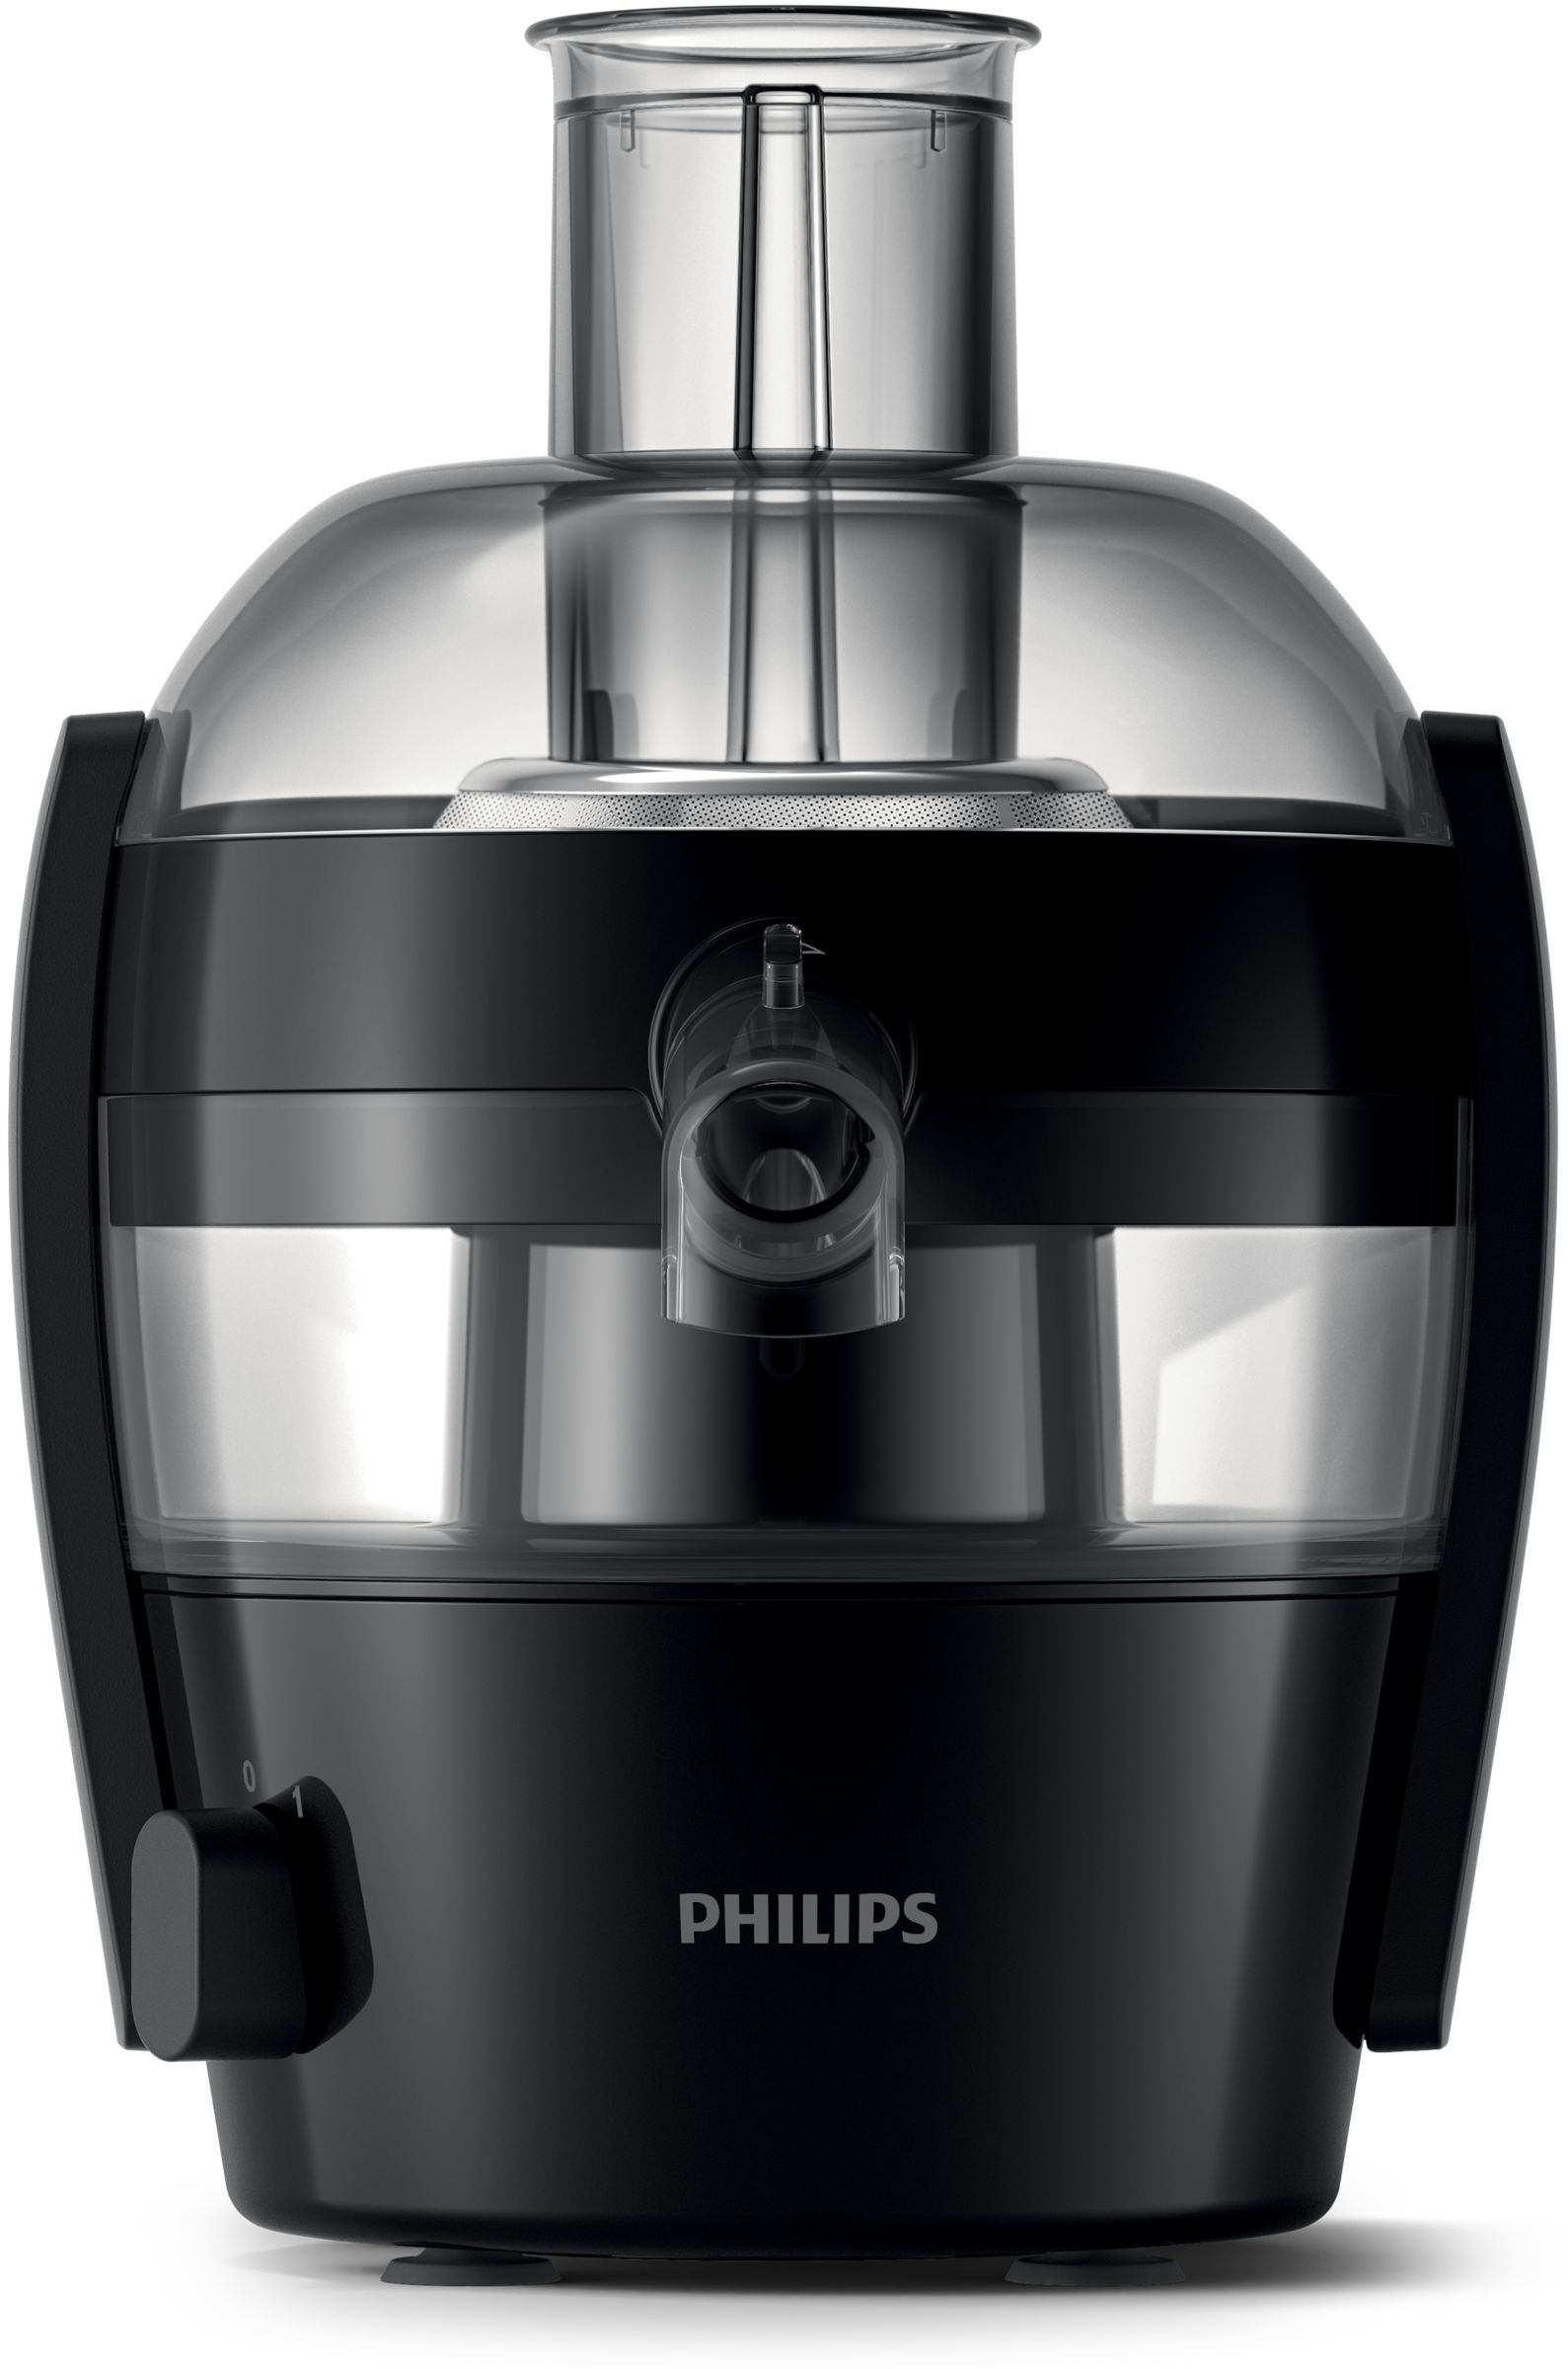 Image of Philips Viva Collection HR1832/00 Centrifuga